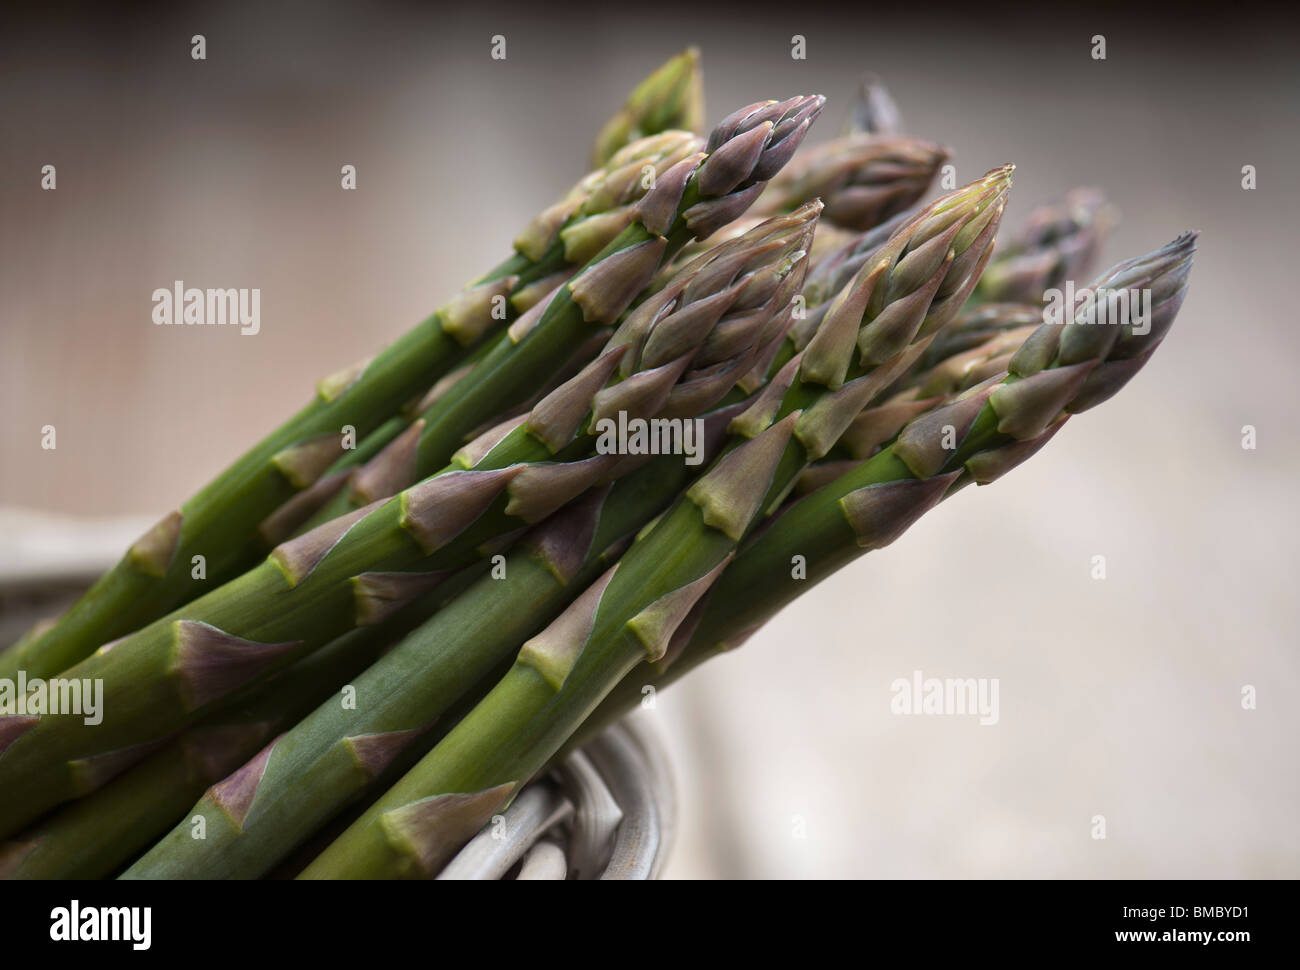 A Bunch Of Fresh Asparagus In A Basket Stock Photo